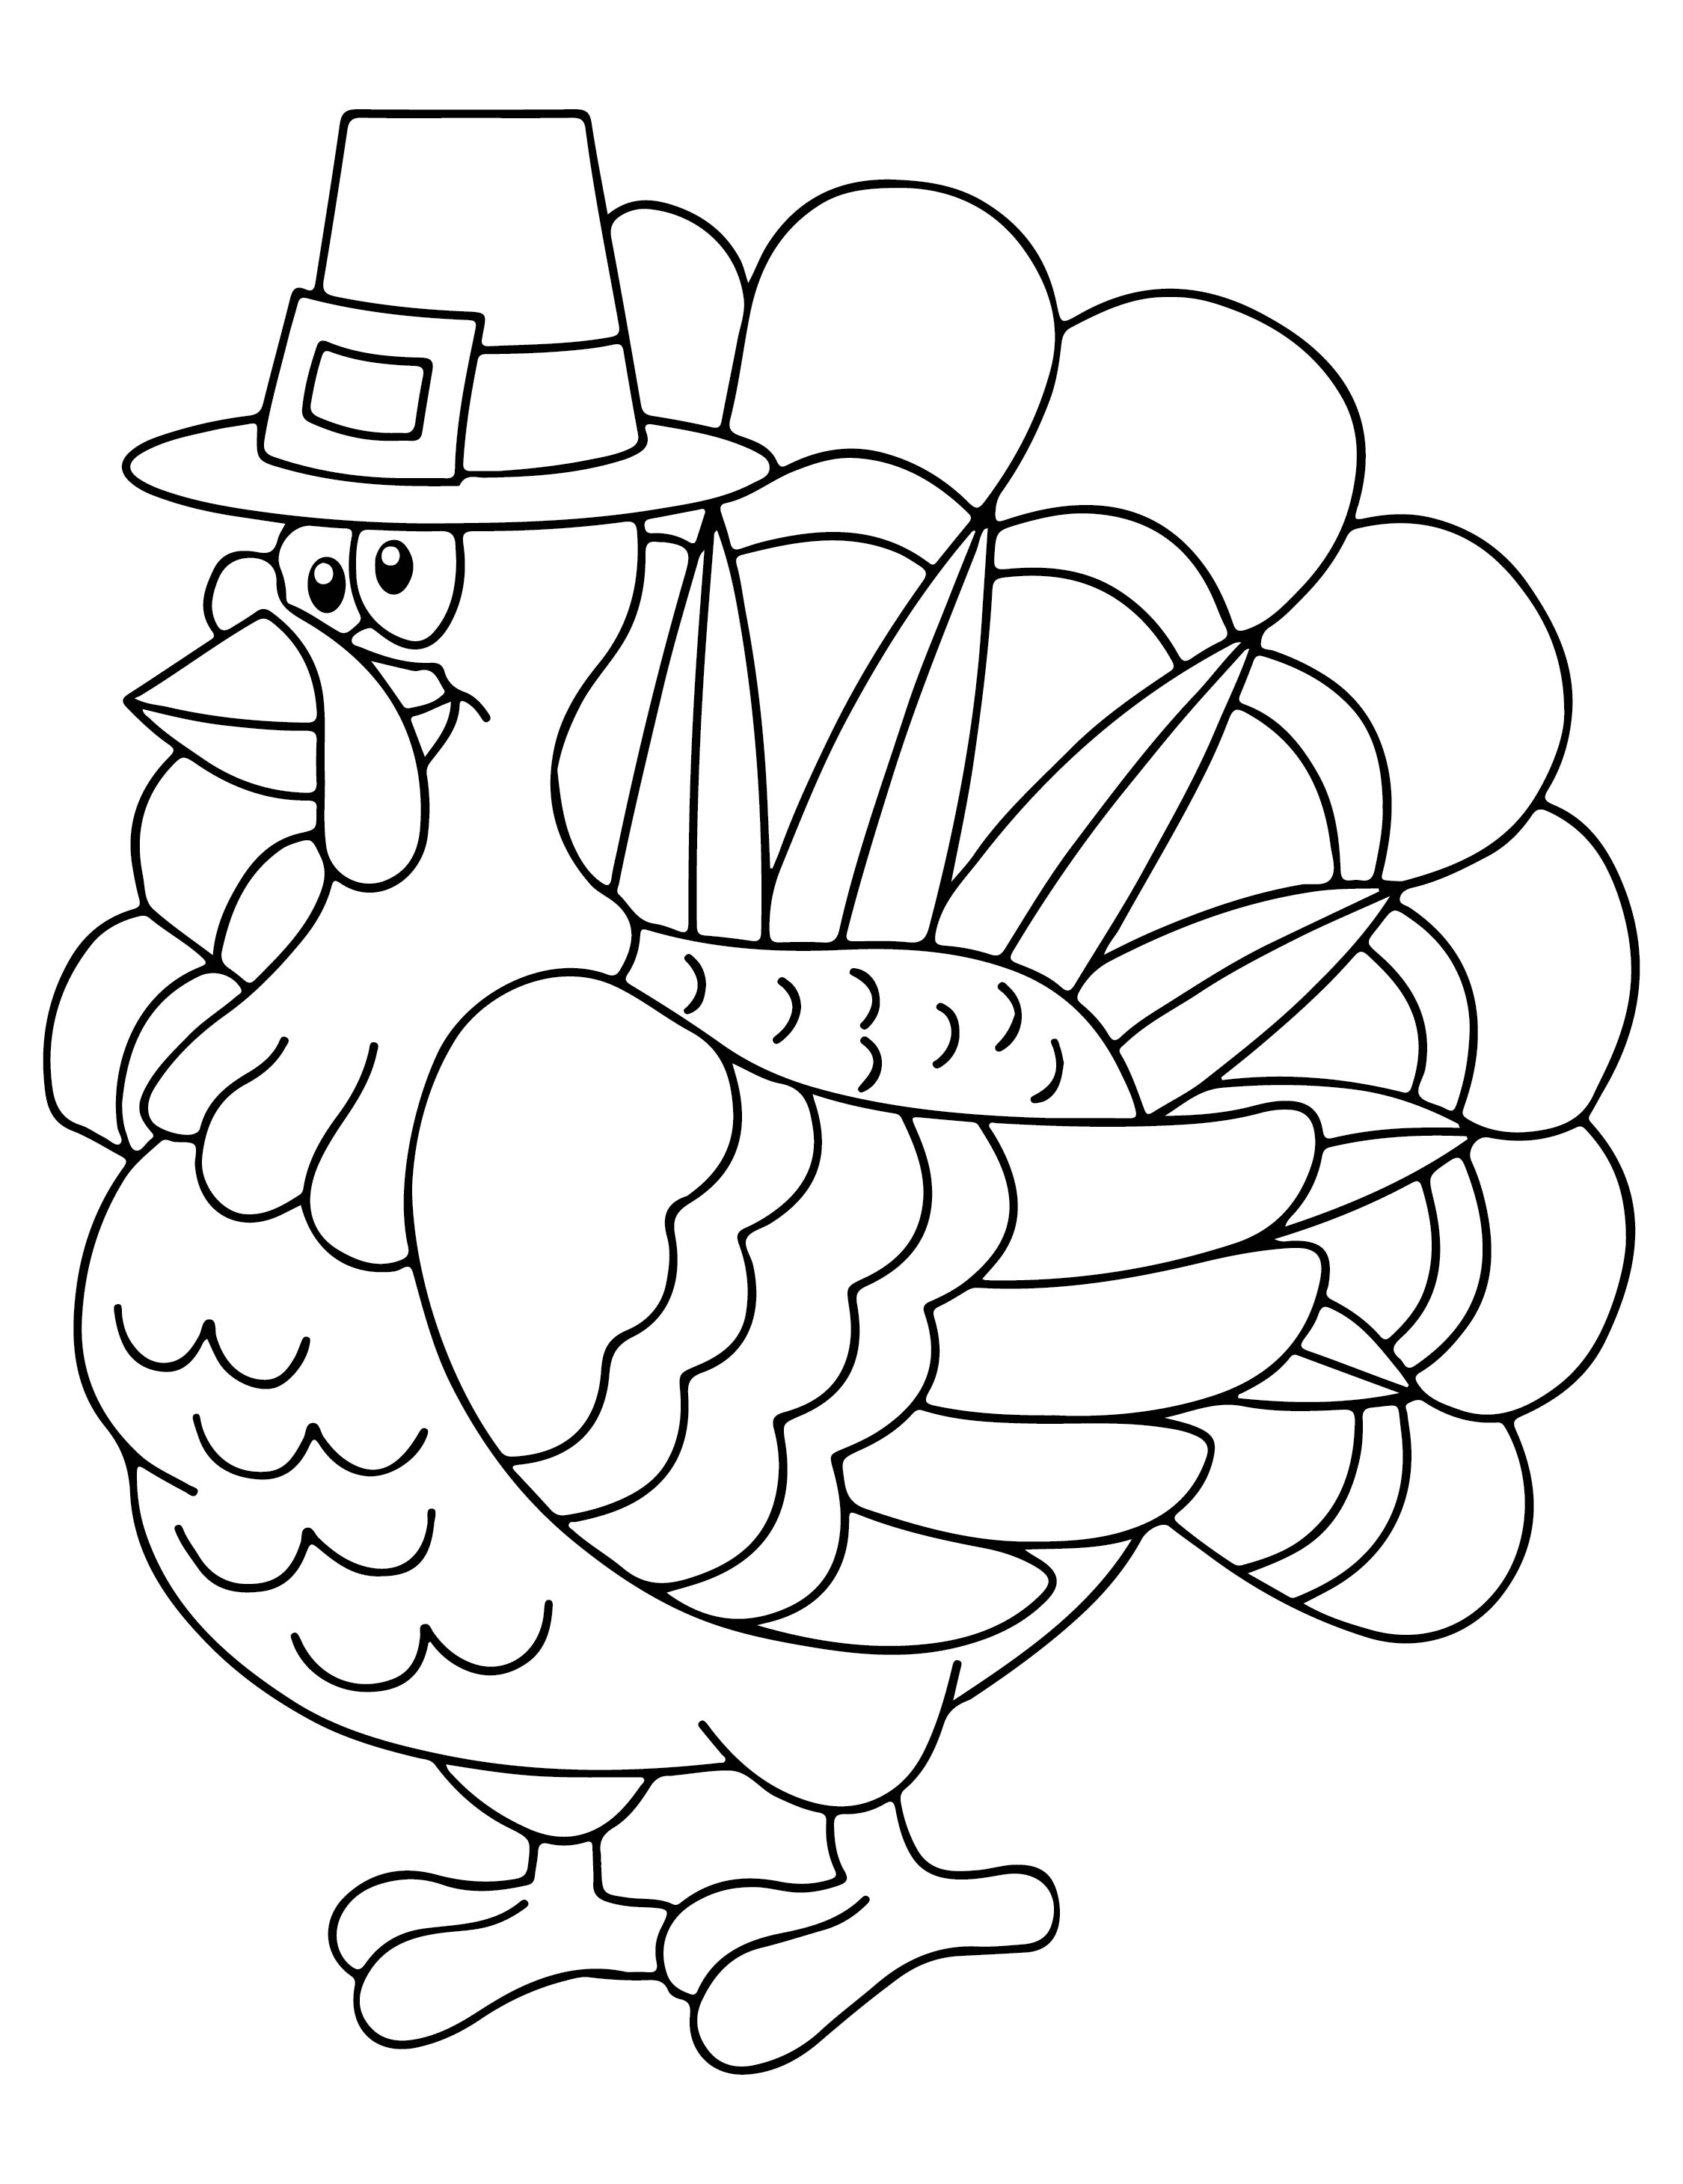 6-best-images-of-thanksgiving-printable-activity-sheets-free-printable-thanksgiving-coloring